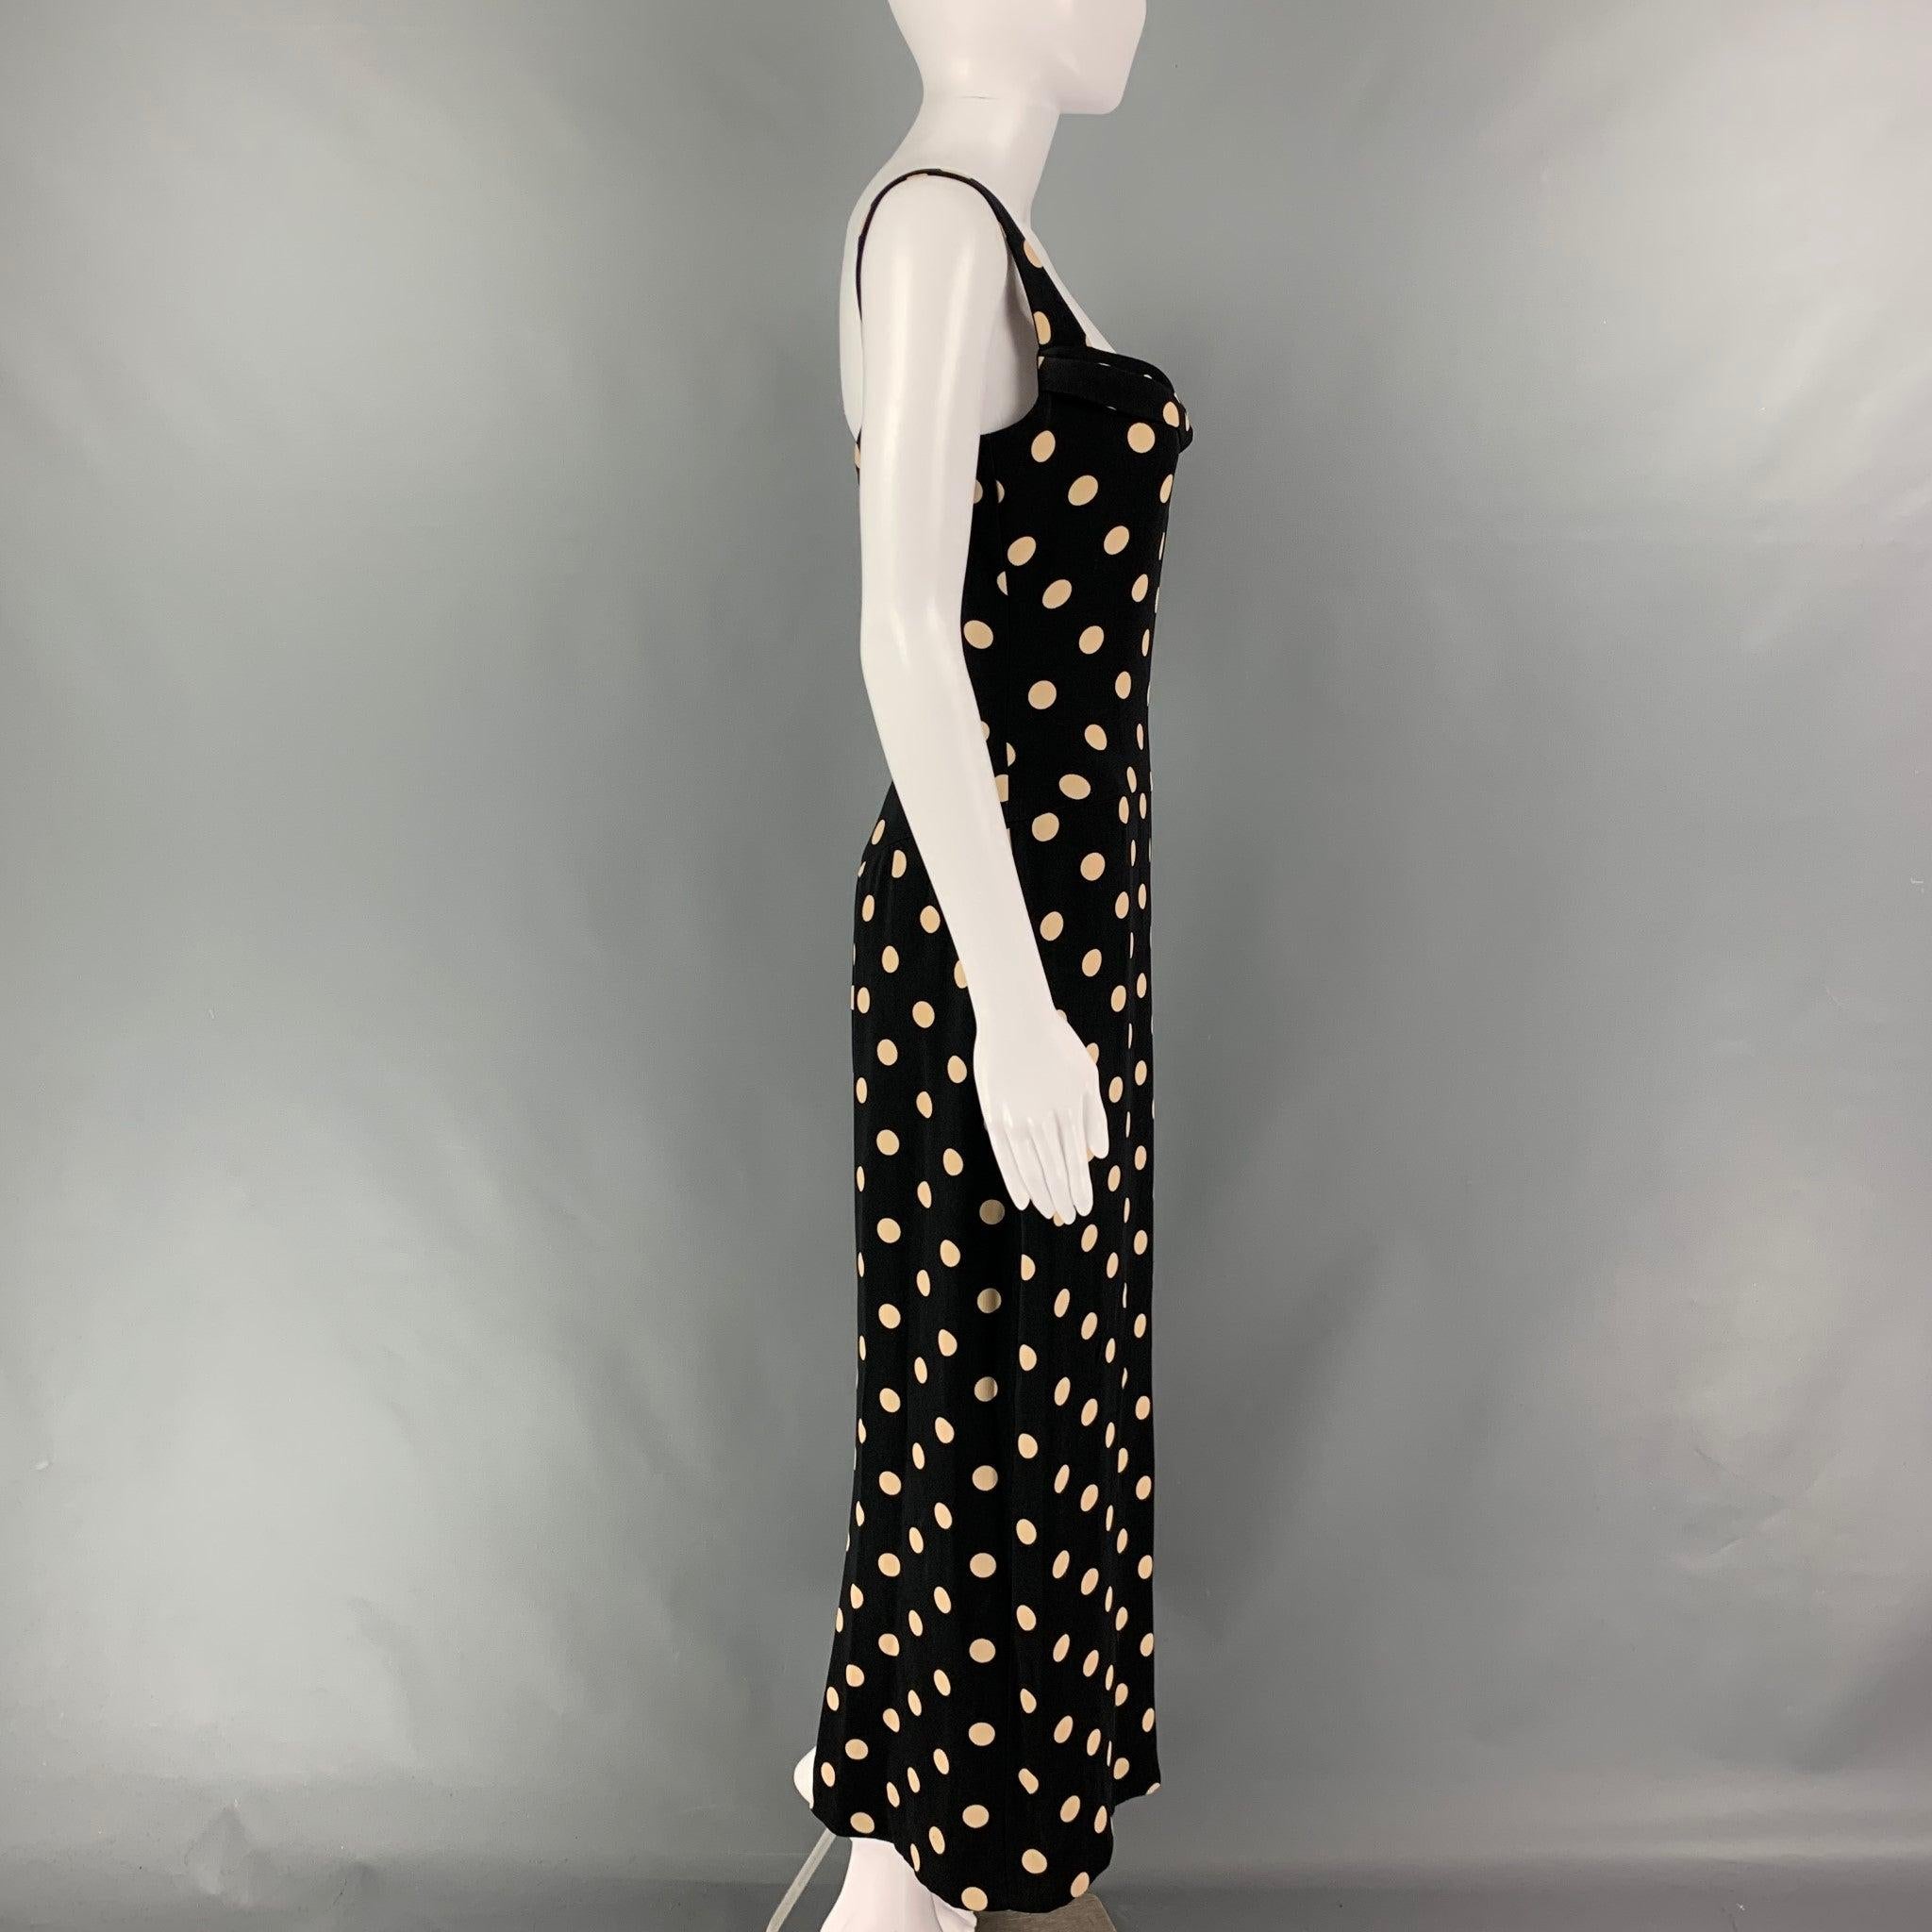 VERA WANG dress comes in a black & beige polka dot silk crepe featuring a draped neckline. Made in USA. Very Good Pre-Owned Condition.
Minor signs of wear. As- Is. 

Marked:  8 

Measurements: 
 Bust: 34 inches Waist: 29 inches Hip: 40 inches